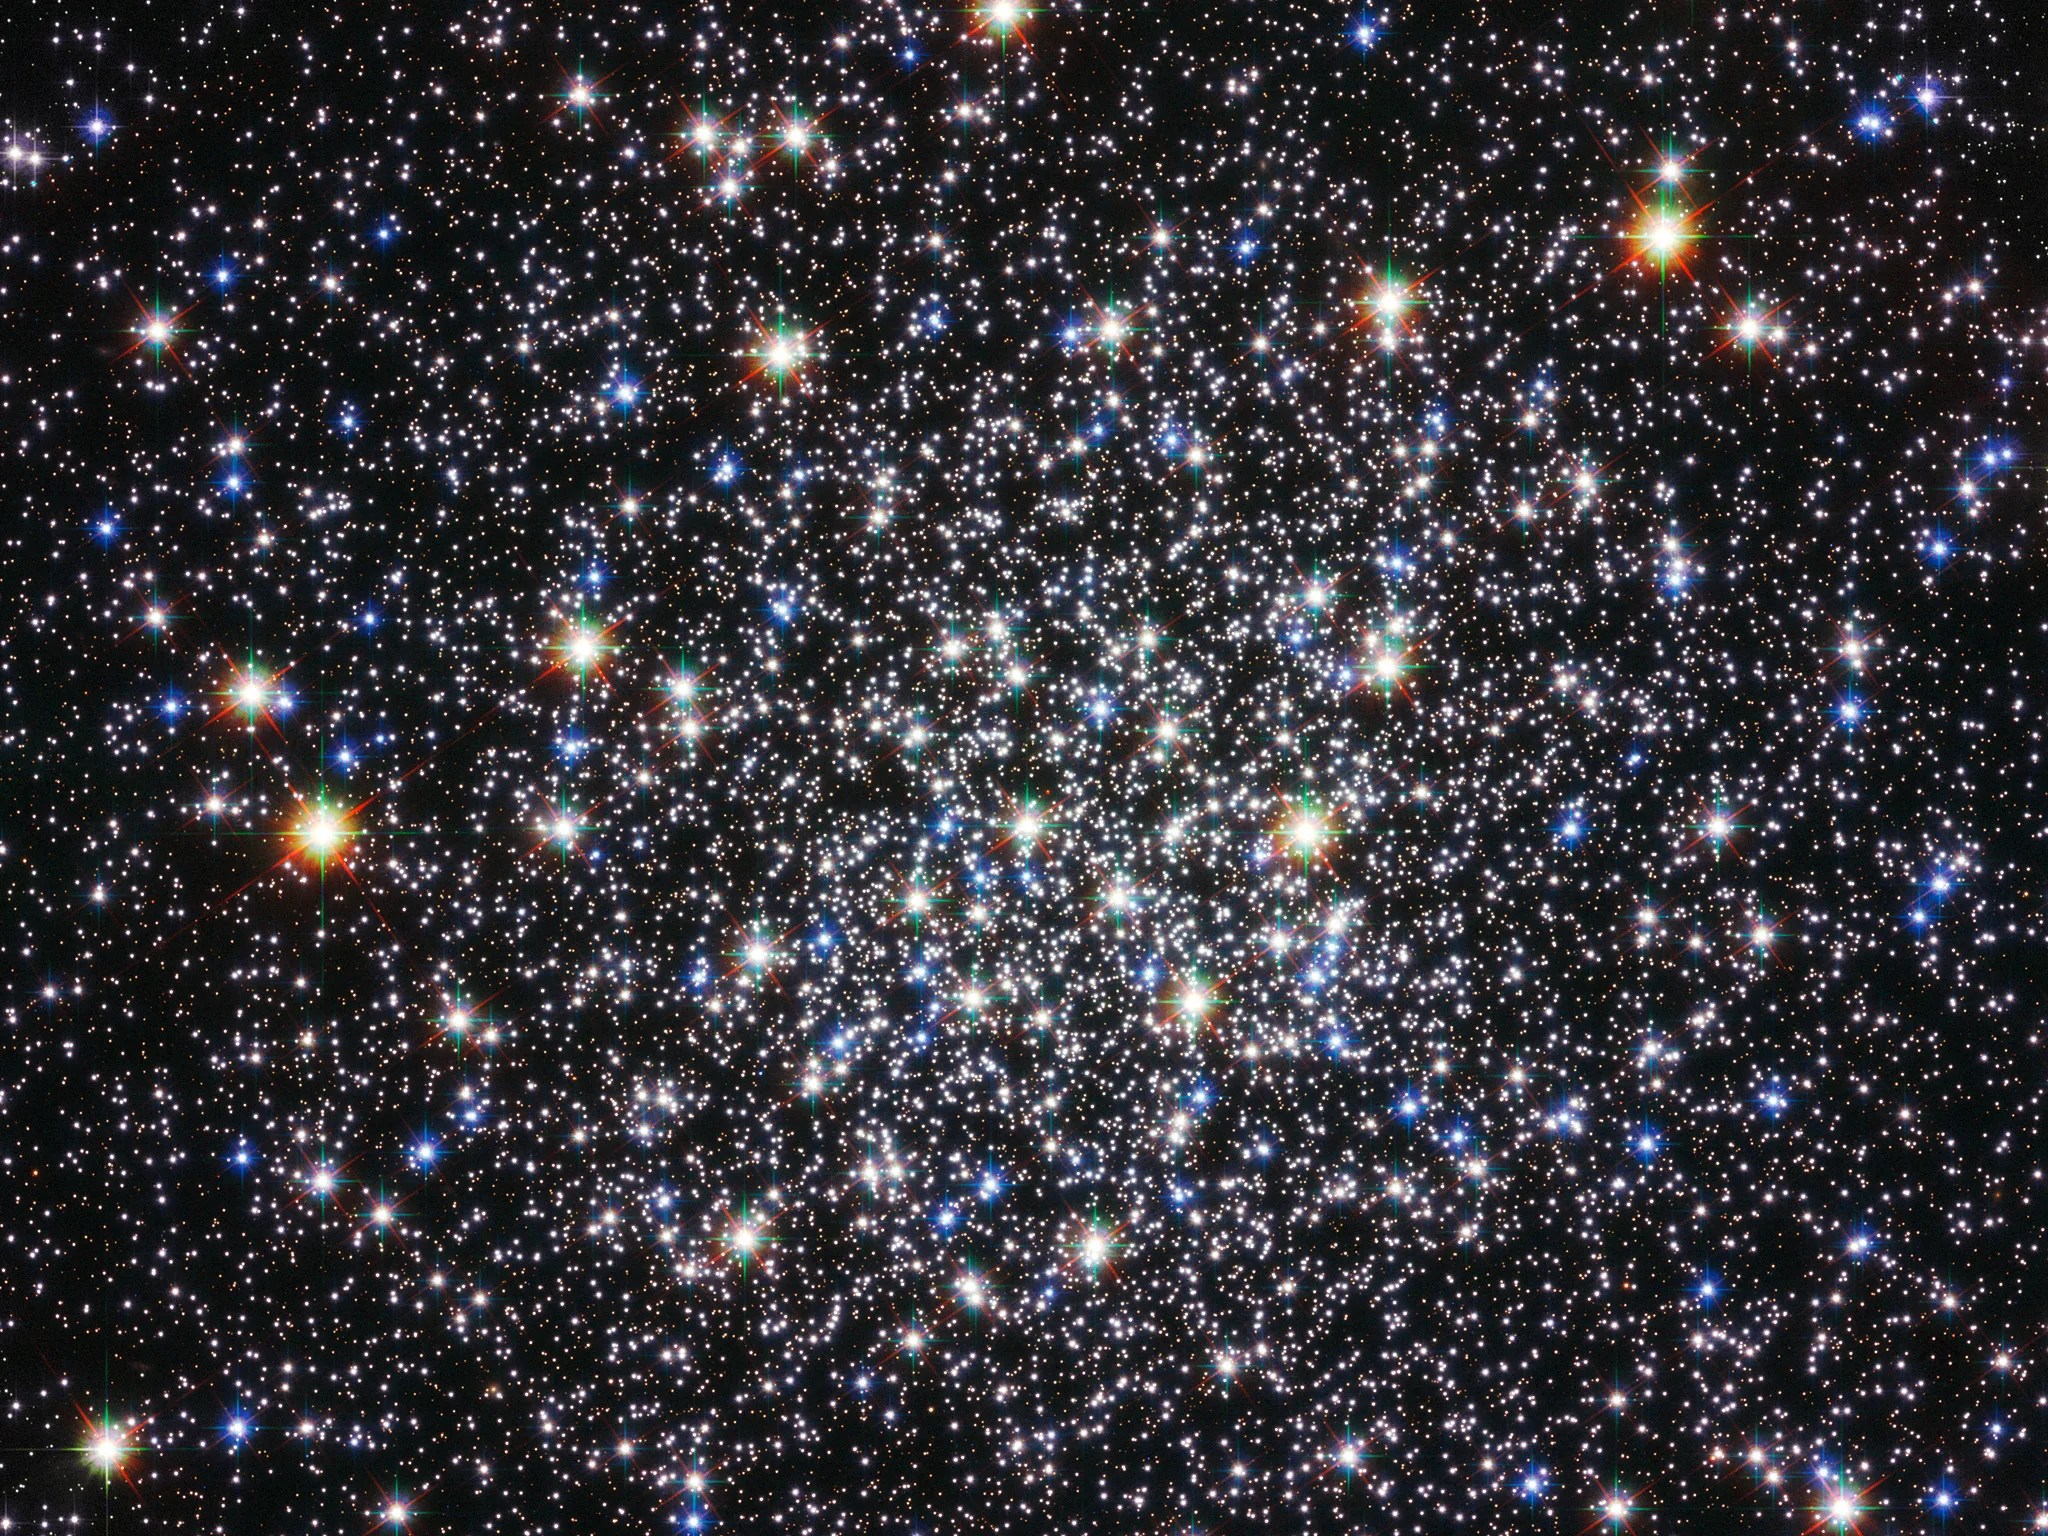 Hubble image of Messier 12